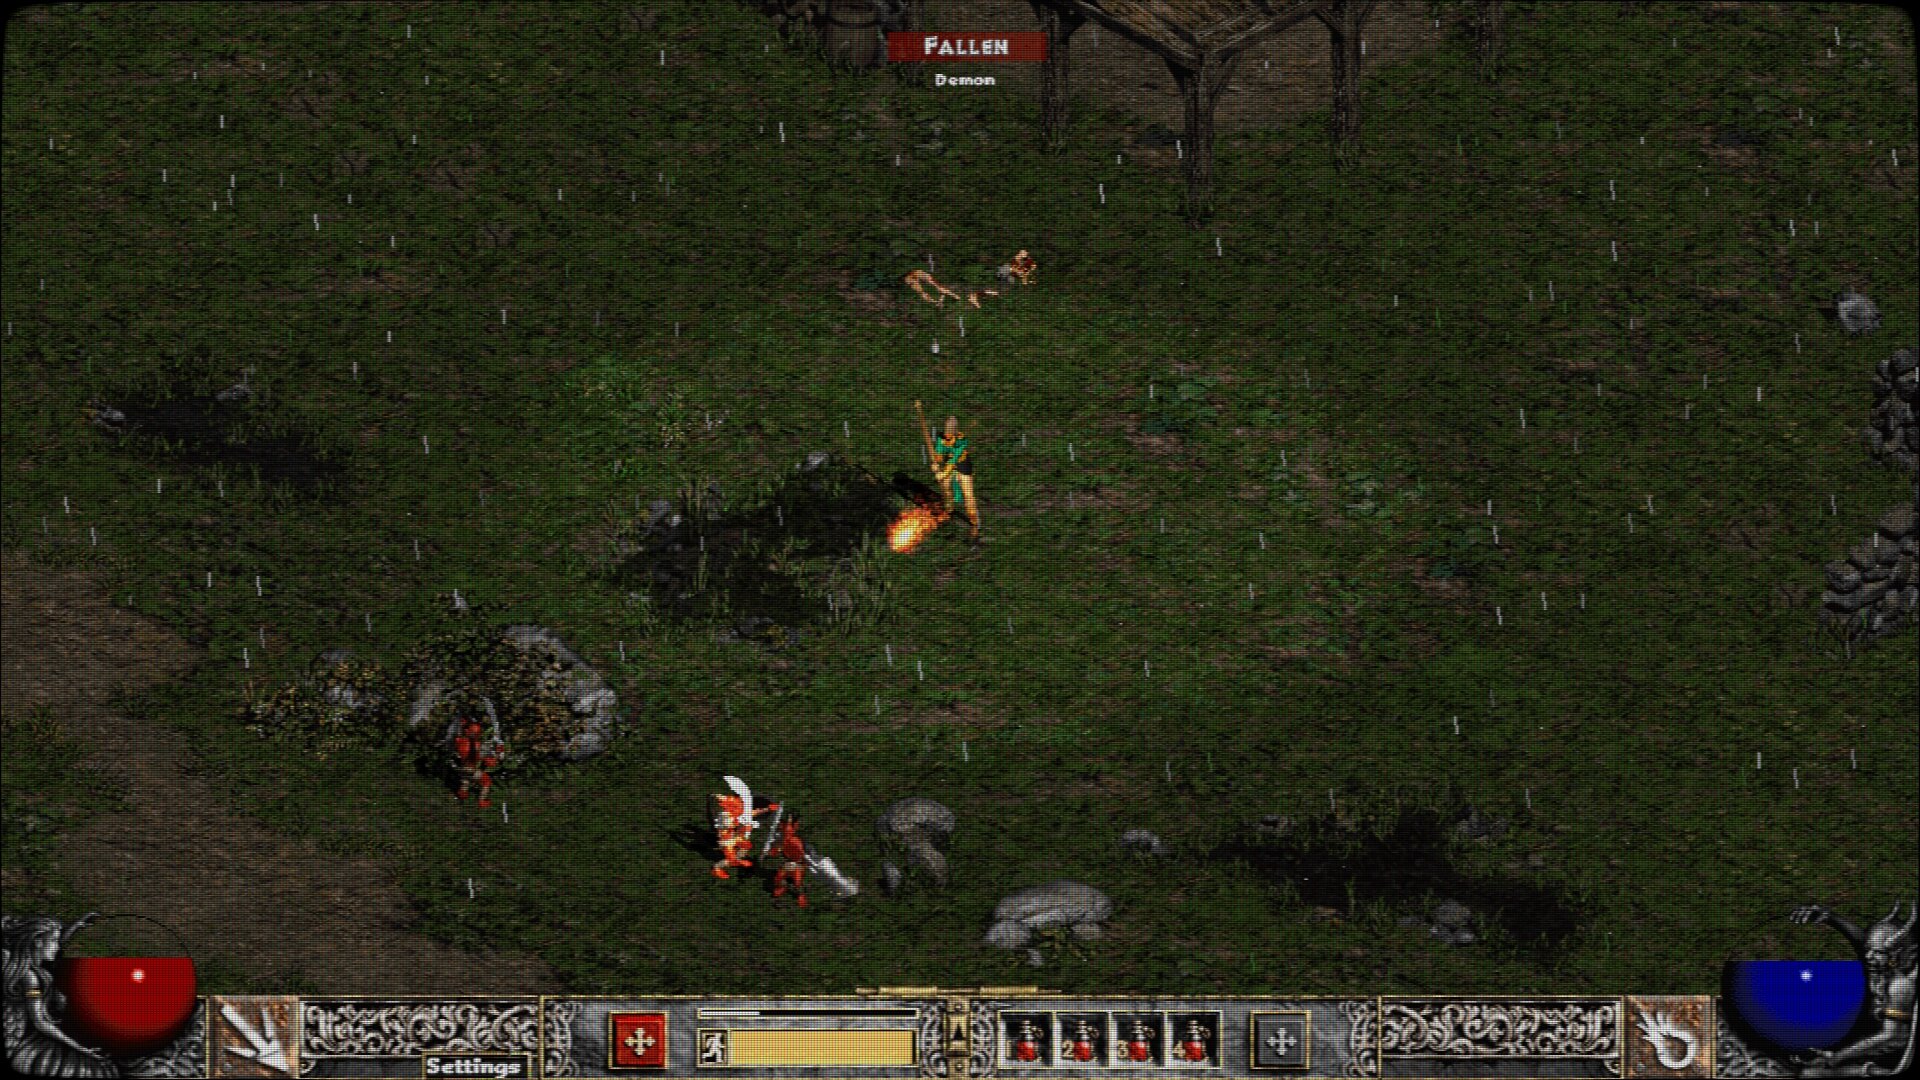 Diablo Ii Remaster Reportedly In The Works Play The Game Now In 1080p